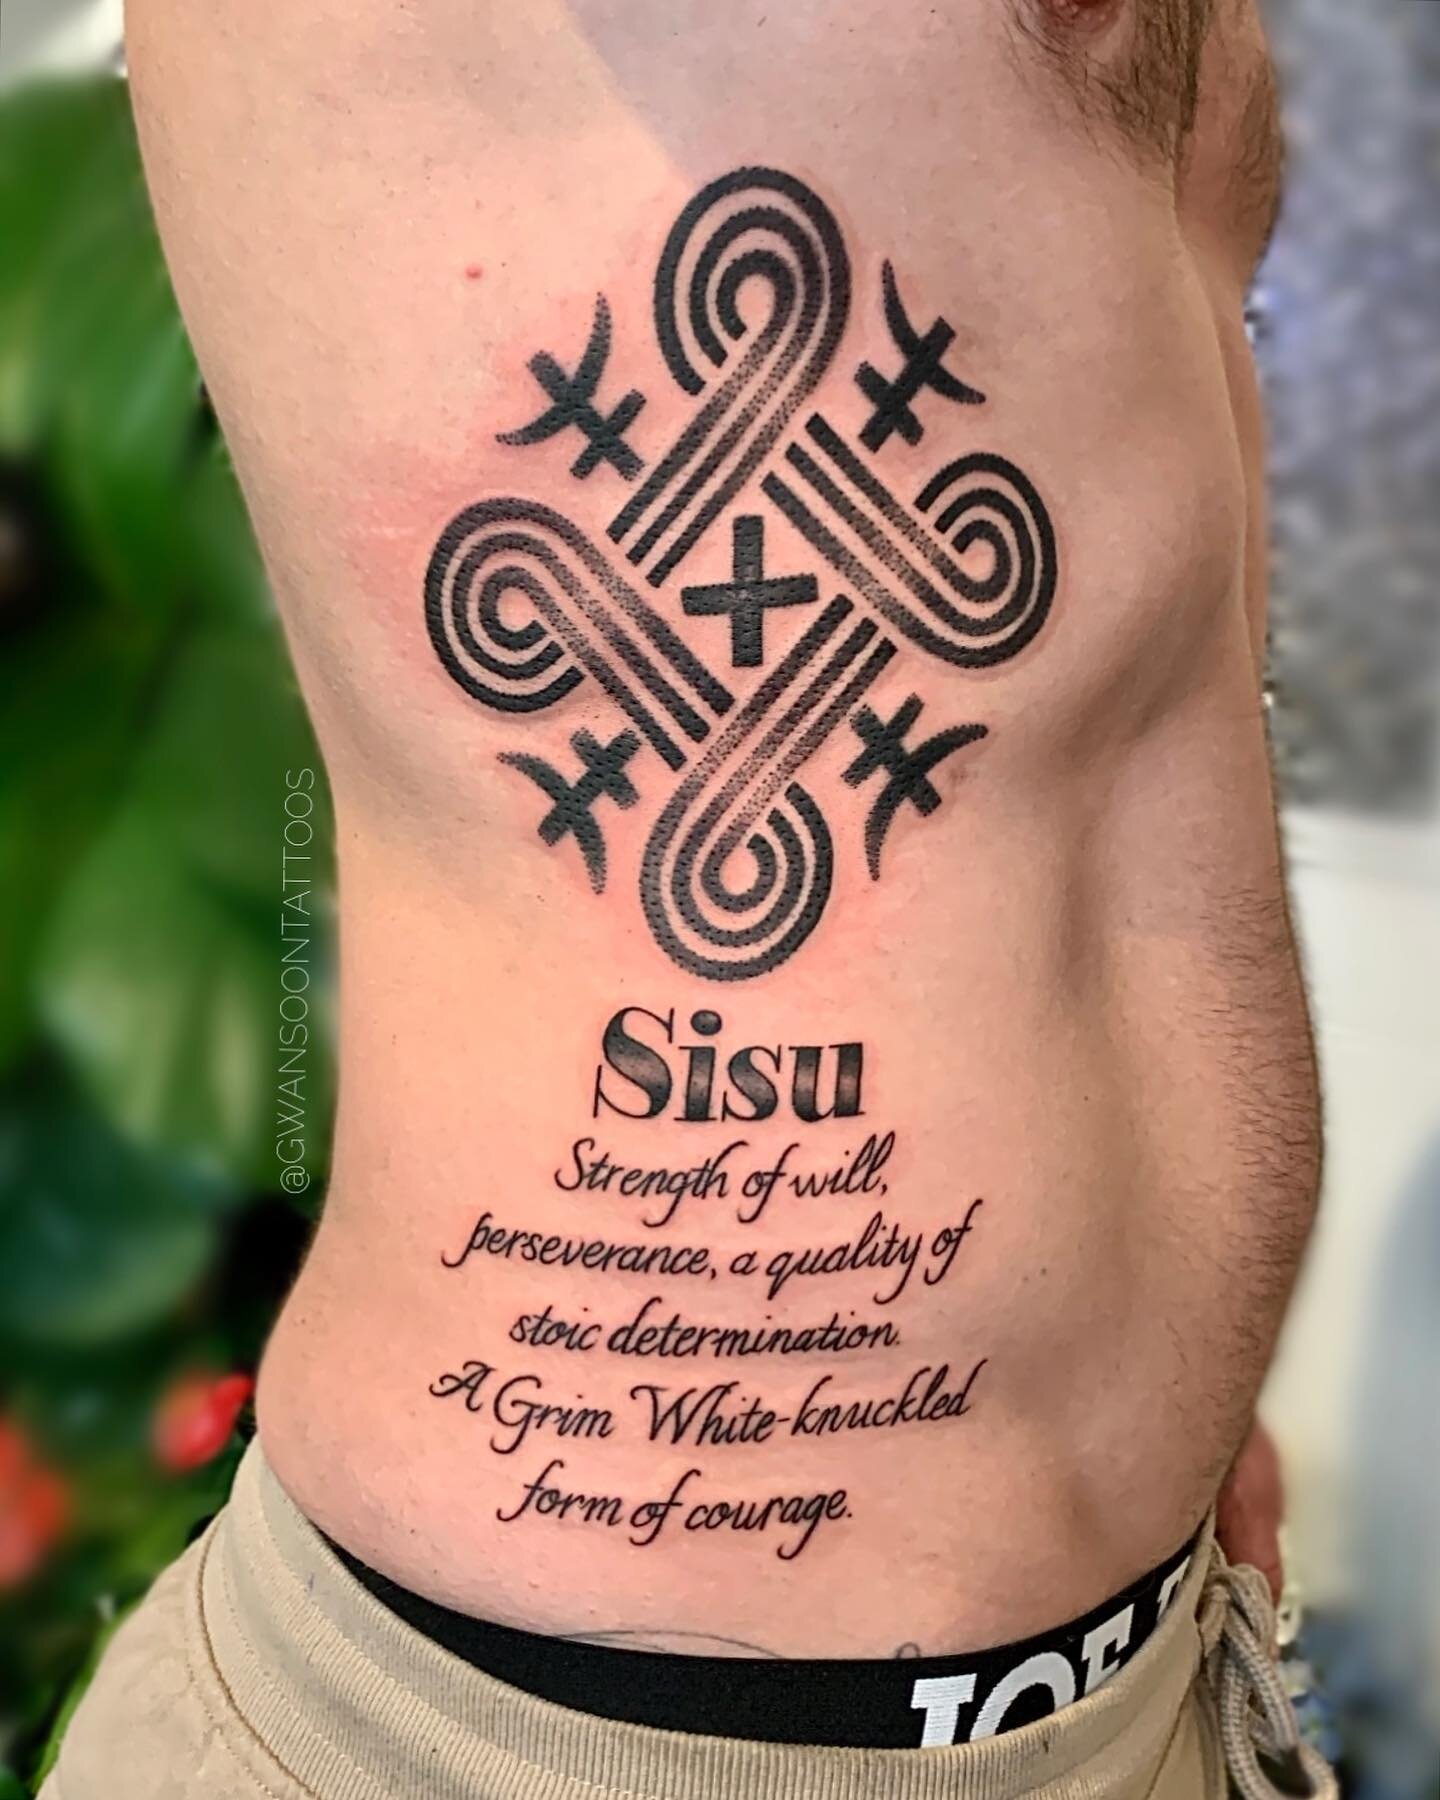 This is a Finnish symbol called Sisu. It represents extraordinary determination in the face of extreme adversity, and courage - which he definitely had! 👏🏼 Thanks Dave _________________________________________________ 

Follow us @gwansoontattoos ✍